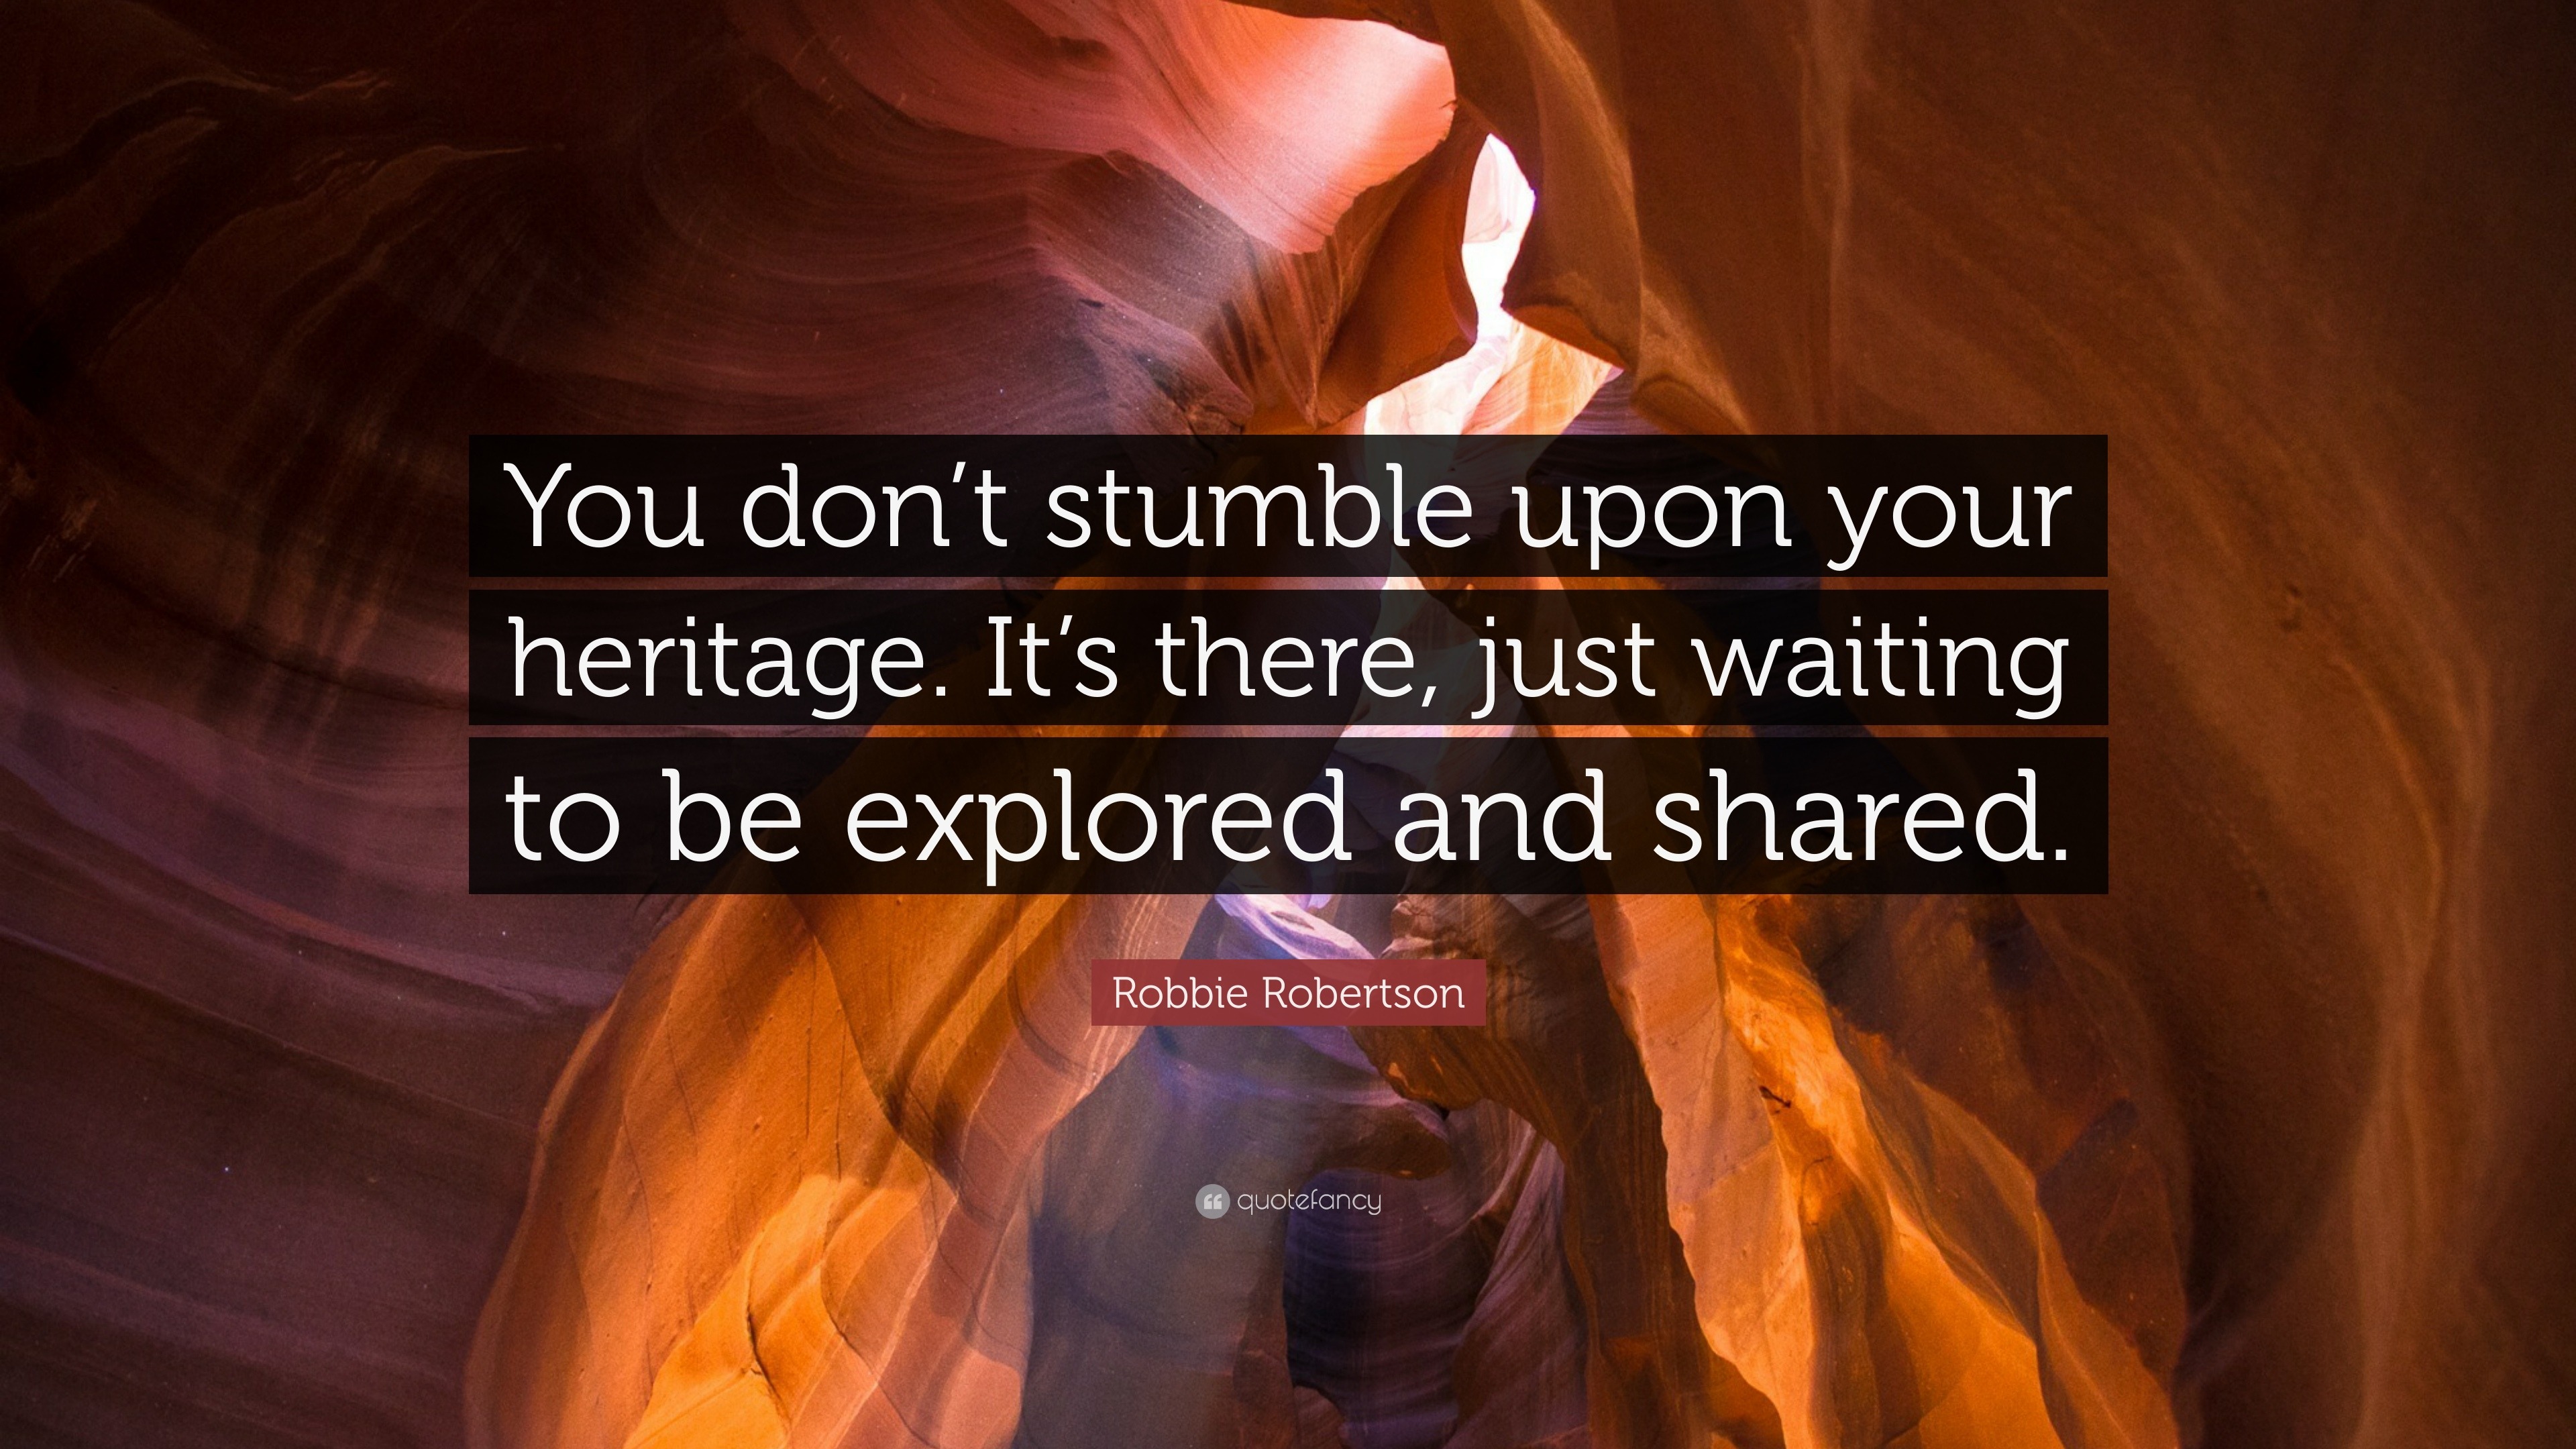 Robbie Robertson Quote: “You don’t stumble upon your heritage. It’s